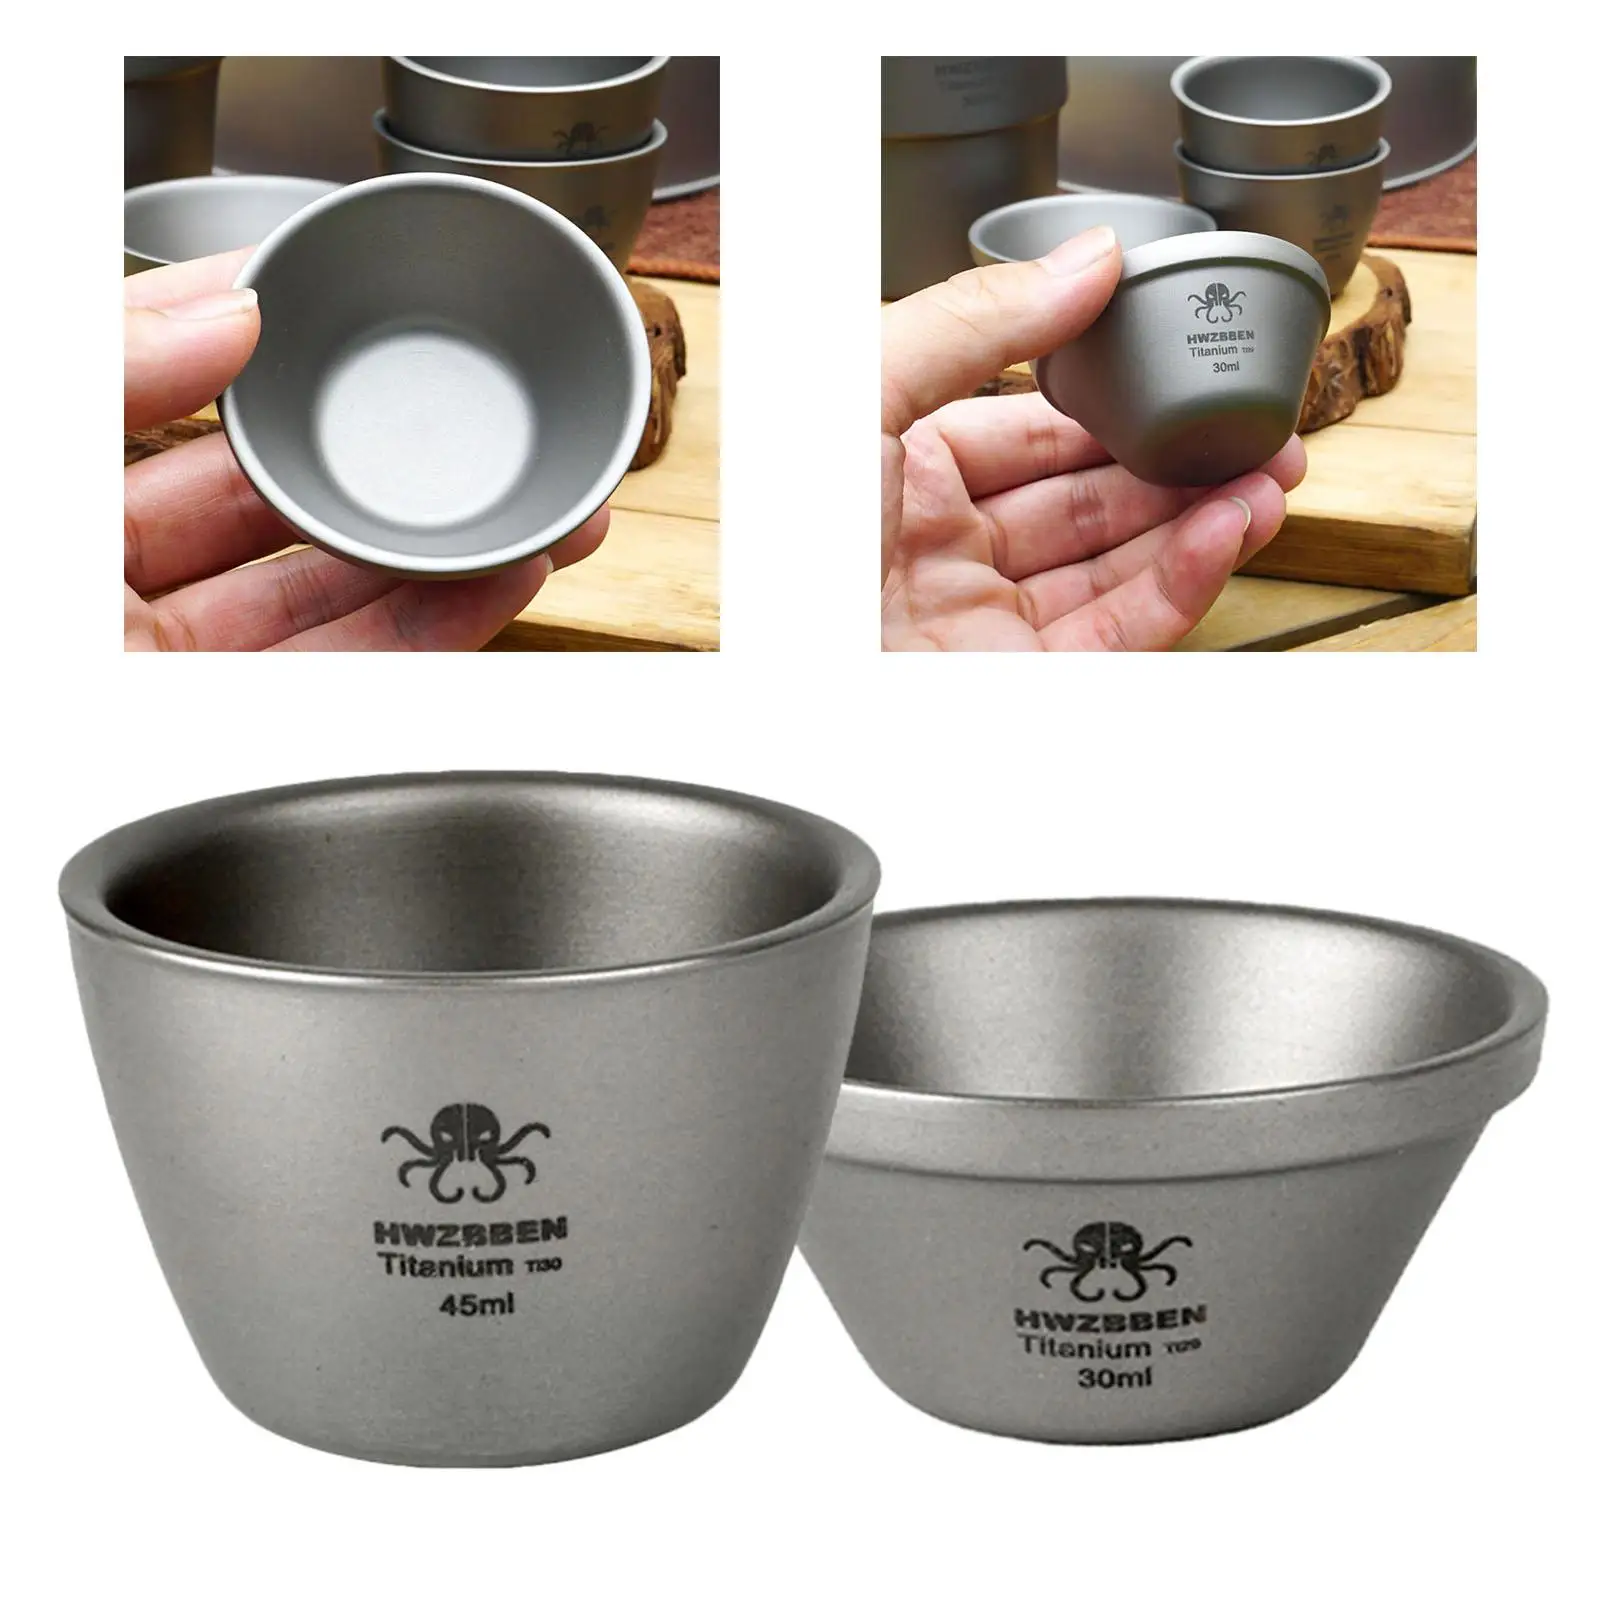 Titanium Cup Double Walled Lightweight Coffee Cups Accessories Mug Cookware Beer Cup for Camping Barbecue Picnic Travel Hiking